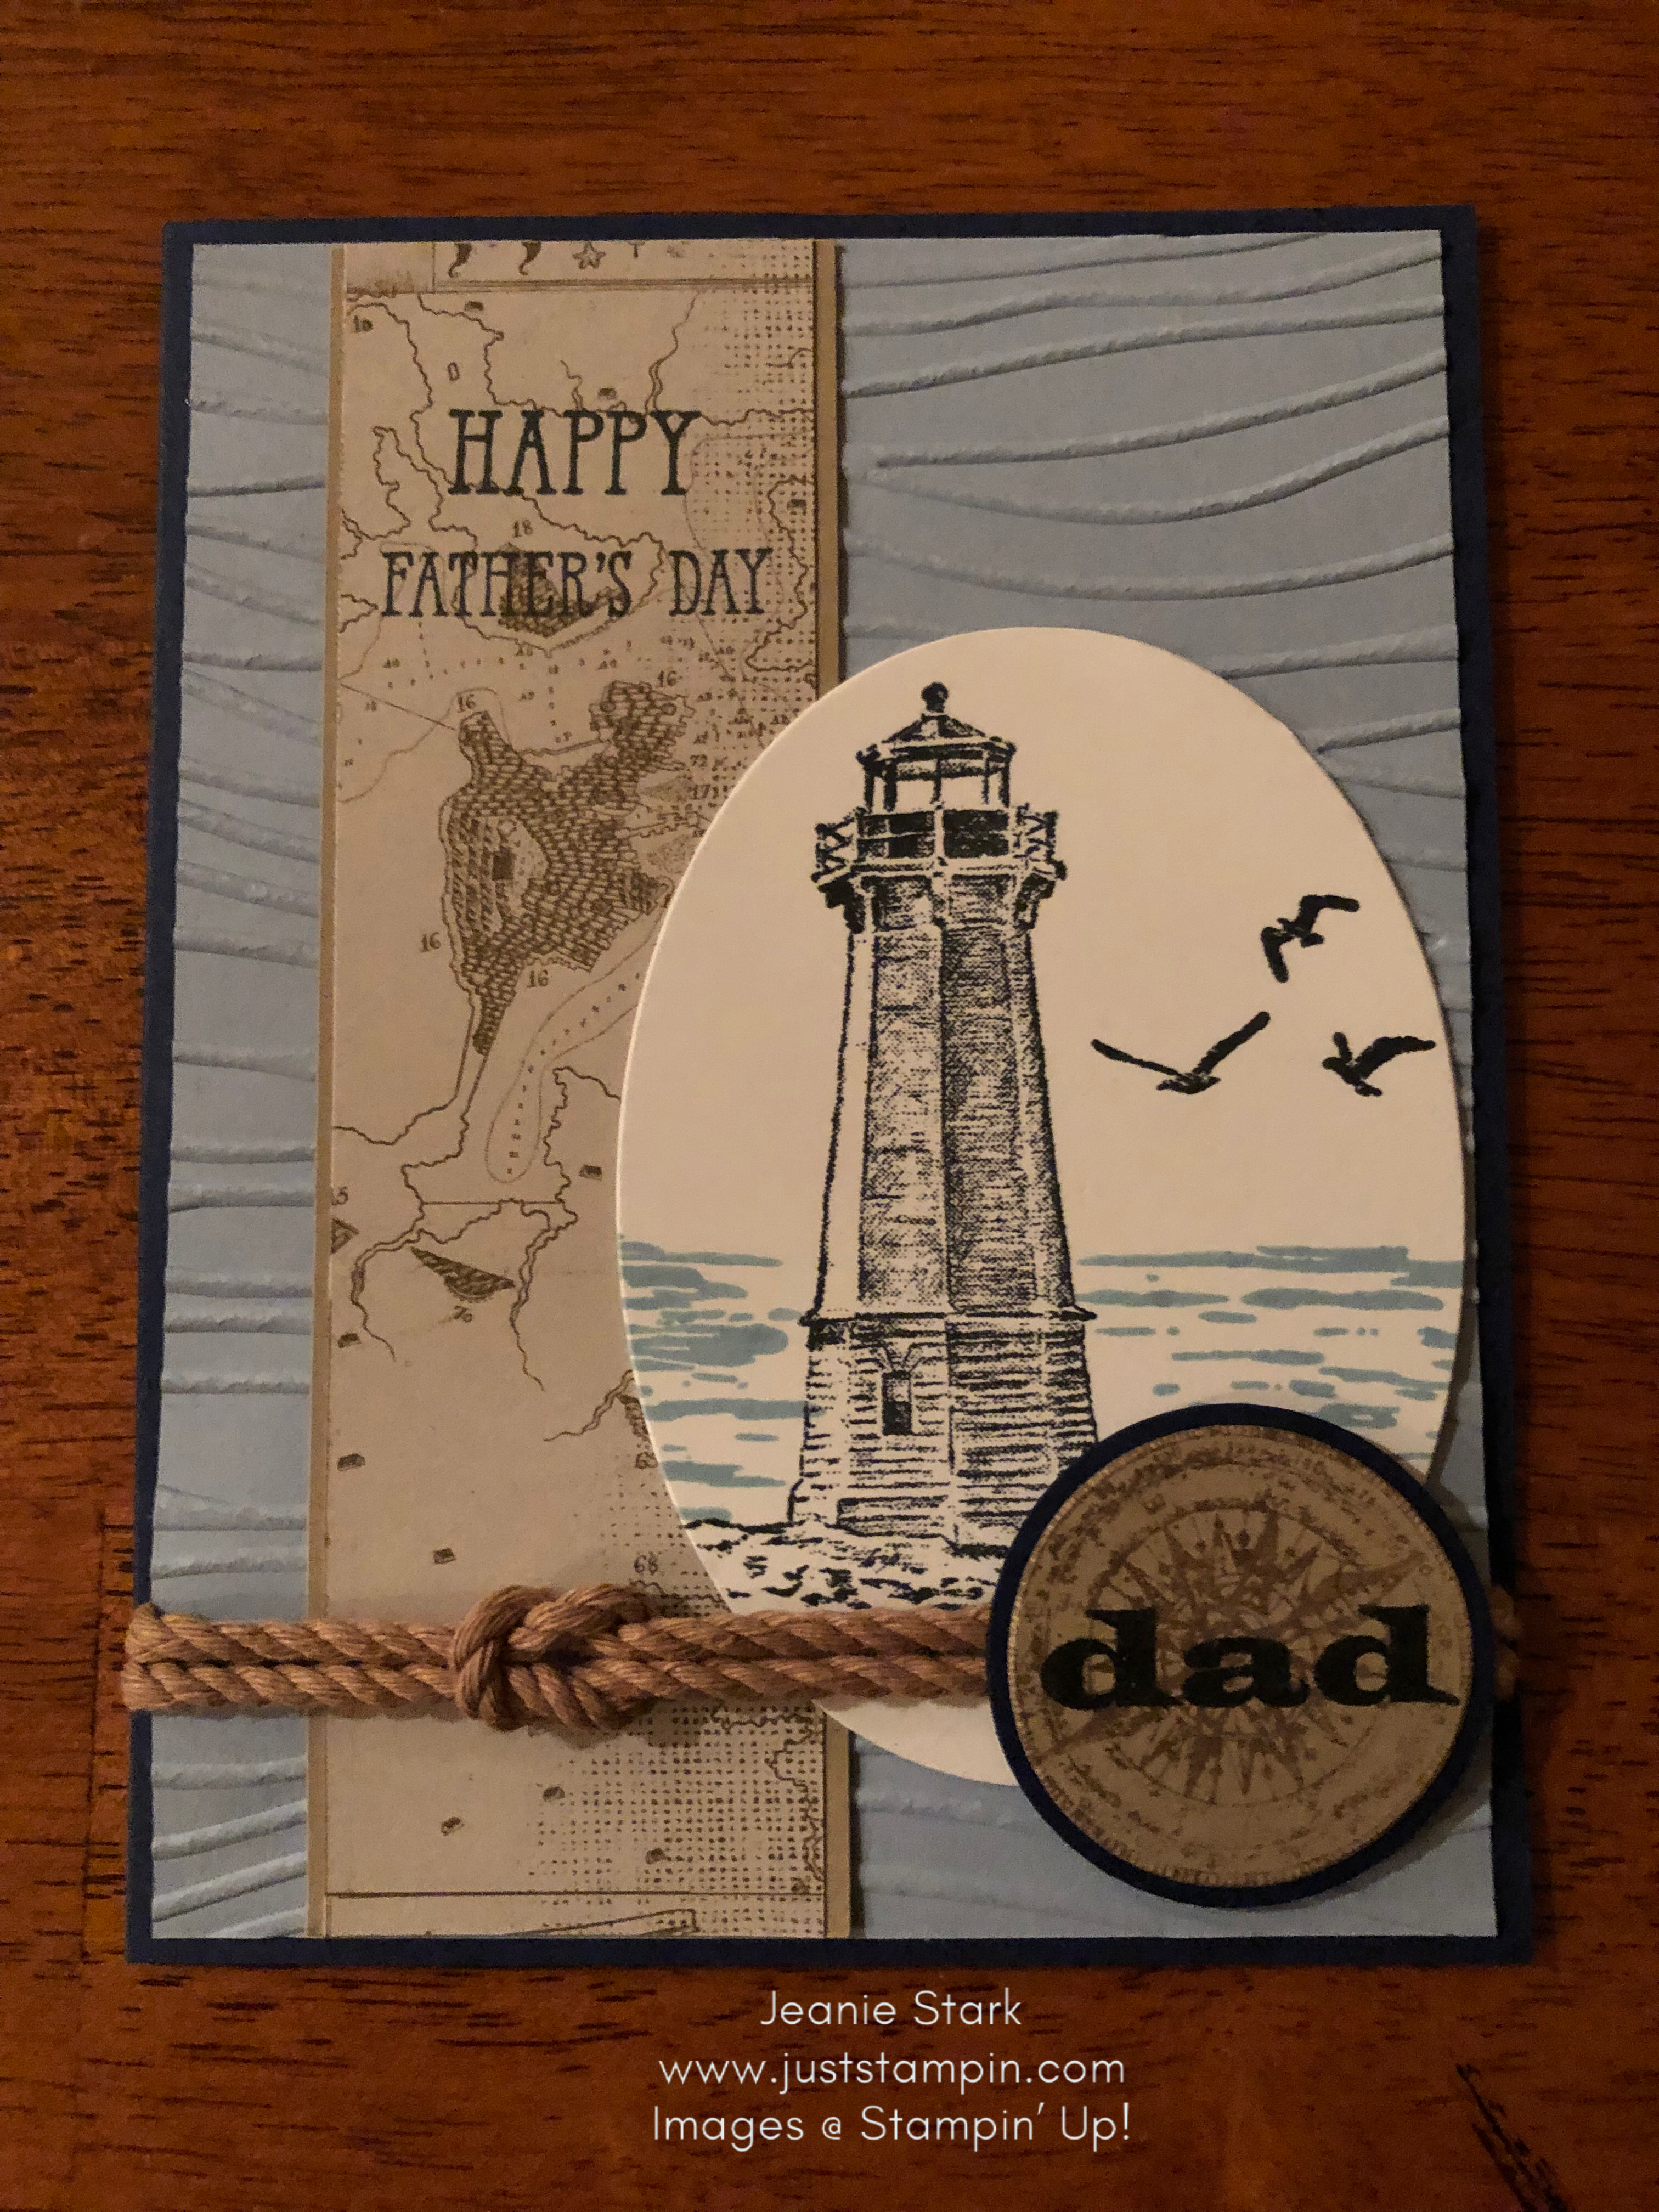 Stampin' Up! Sailing Home and Well Said Father's Day card idea - Jeanie Stark StampinUp